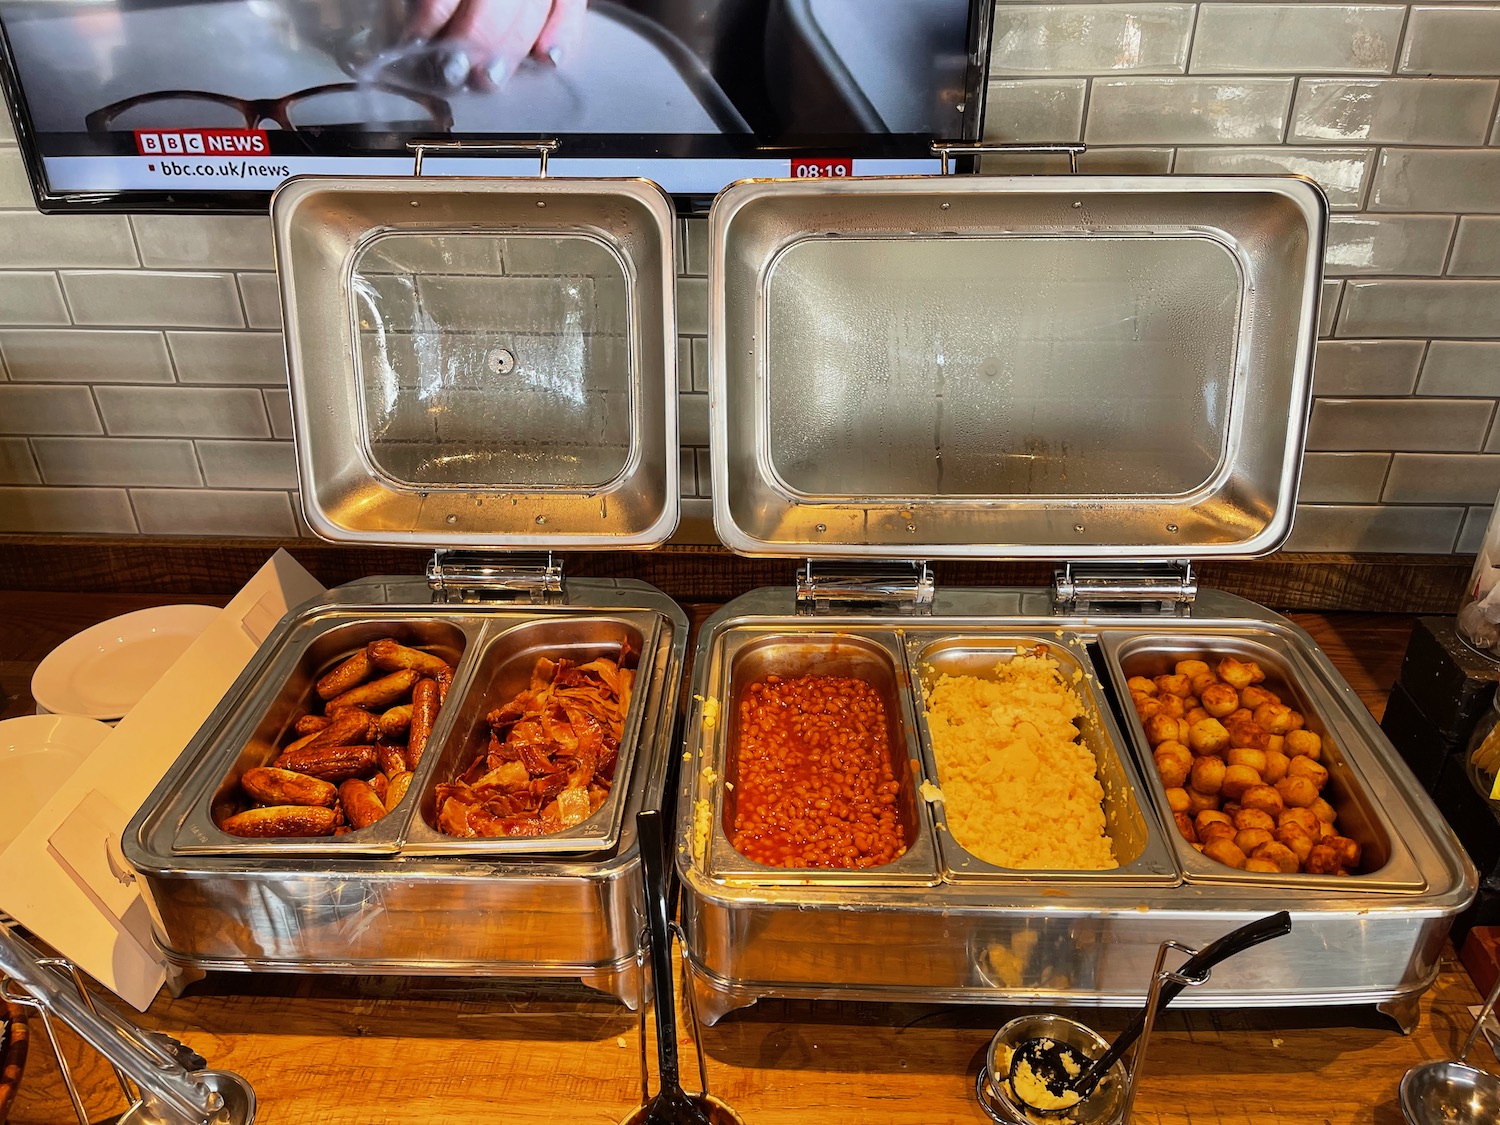 a trays of food on a table